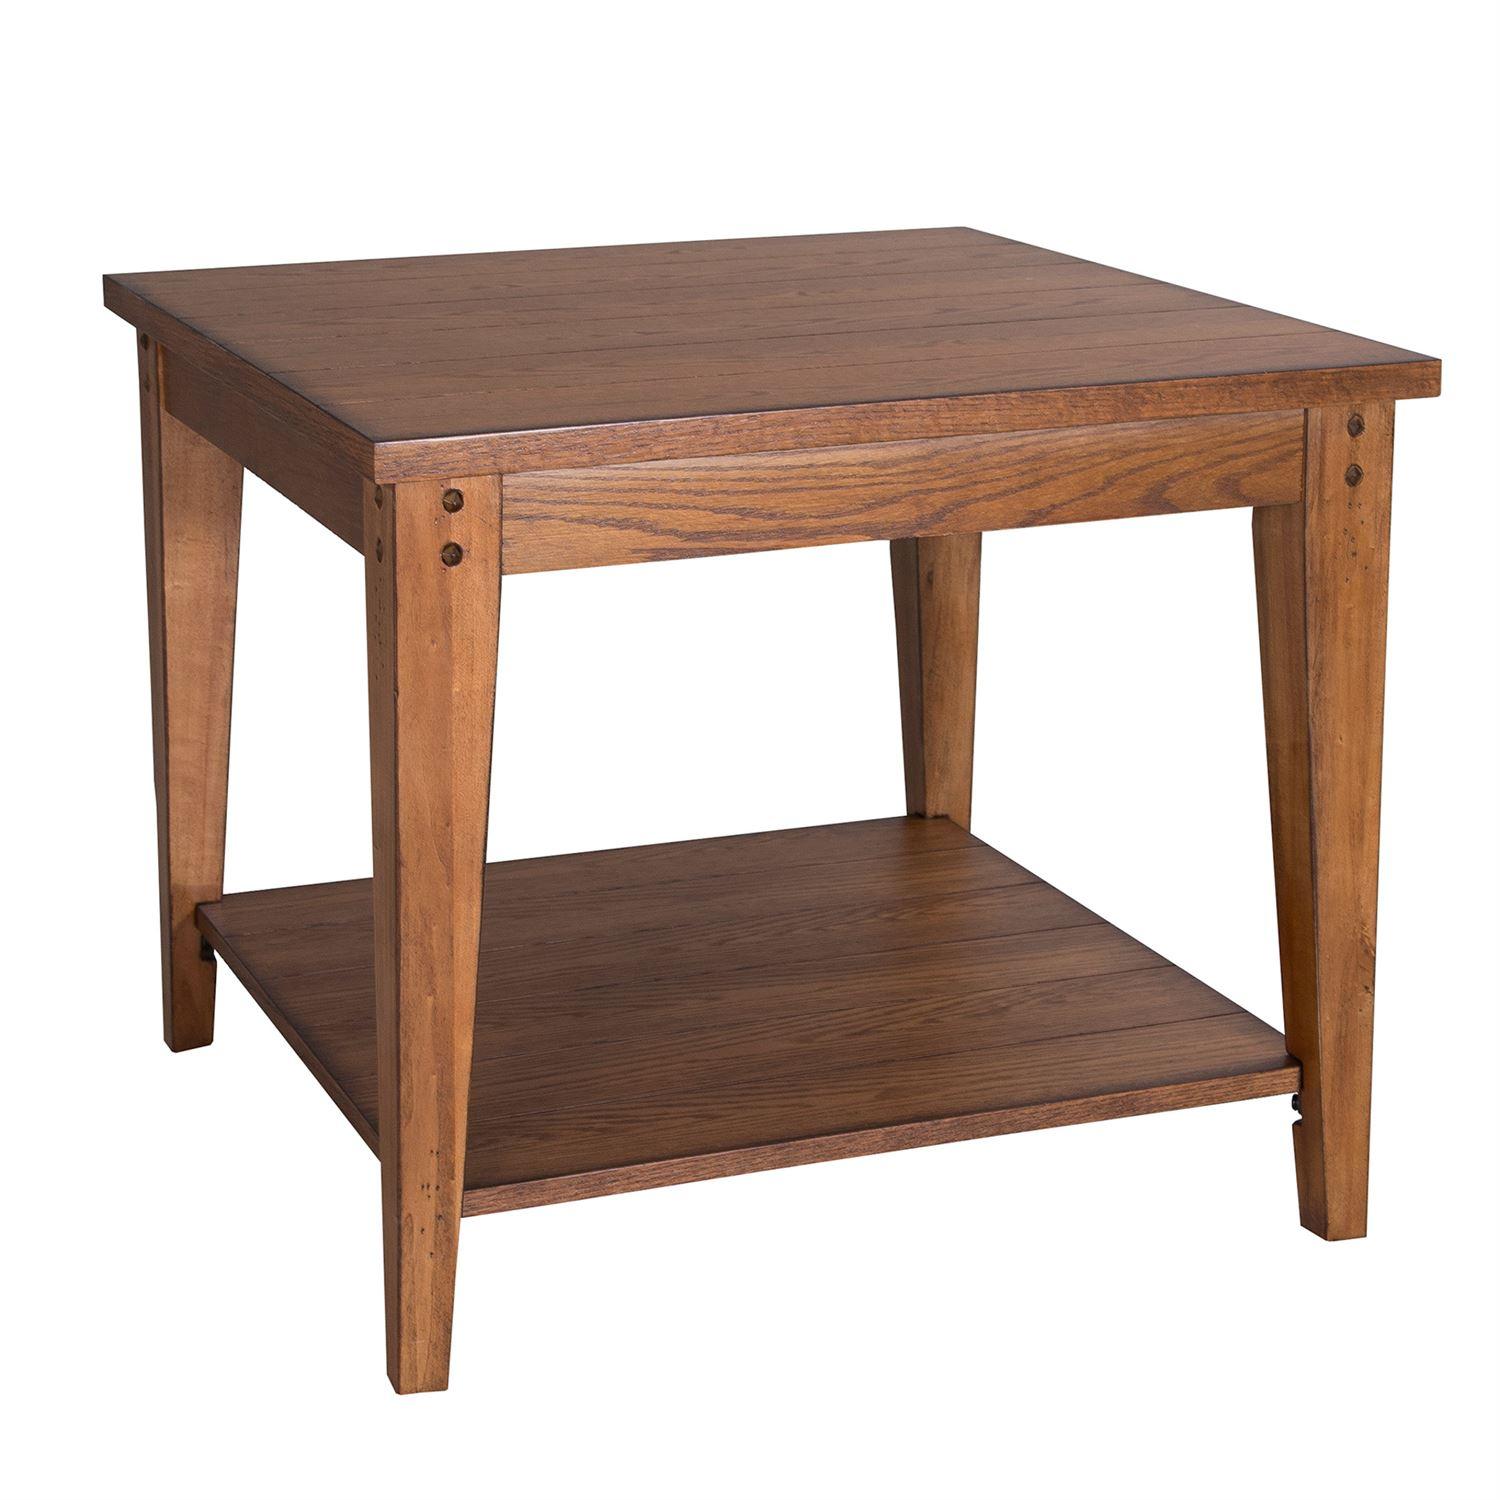 Rustic End Table Lake House  (110-OT) End Table 110-OT1023 in Brown, Oak Veneers Lacquer